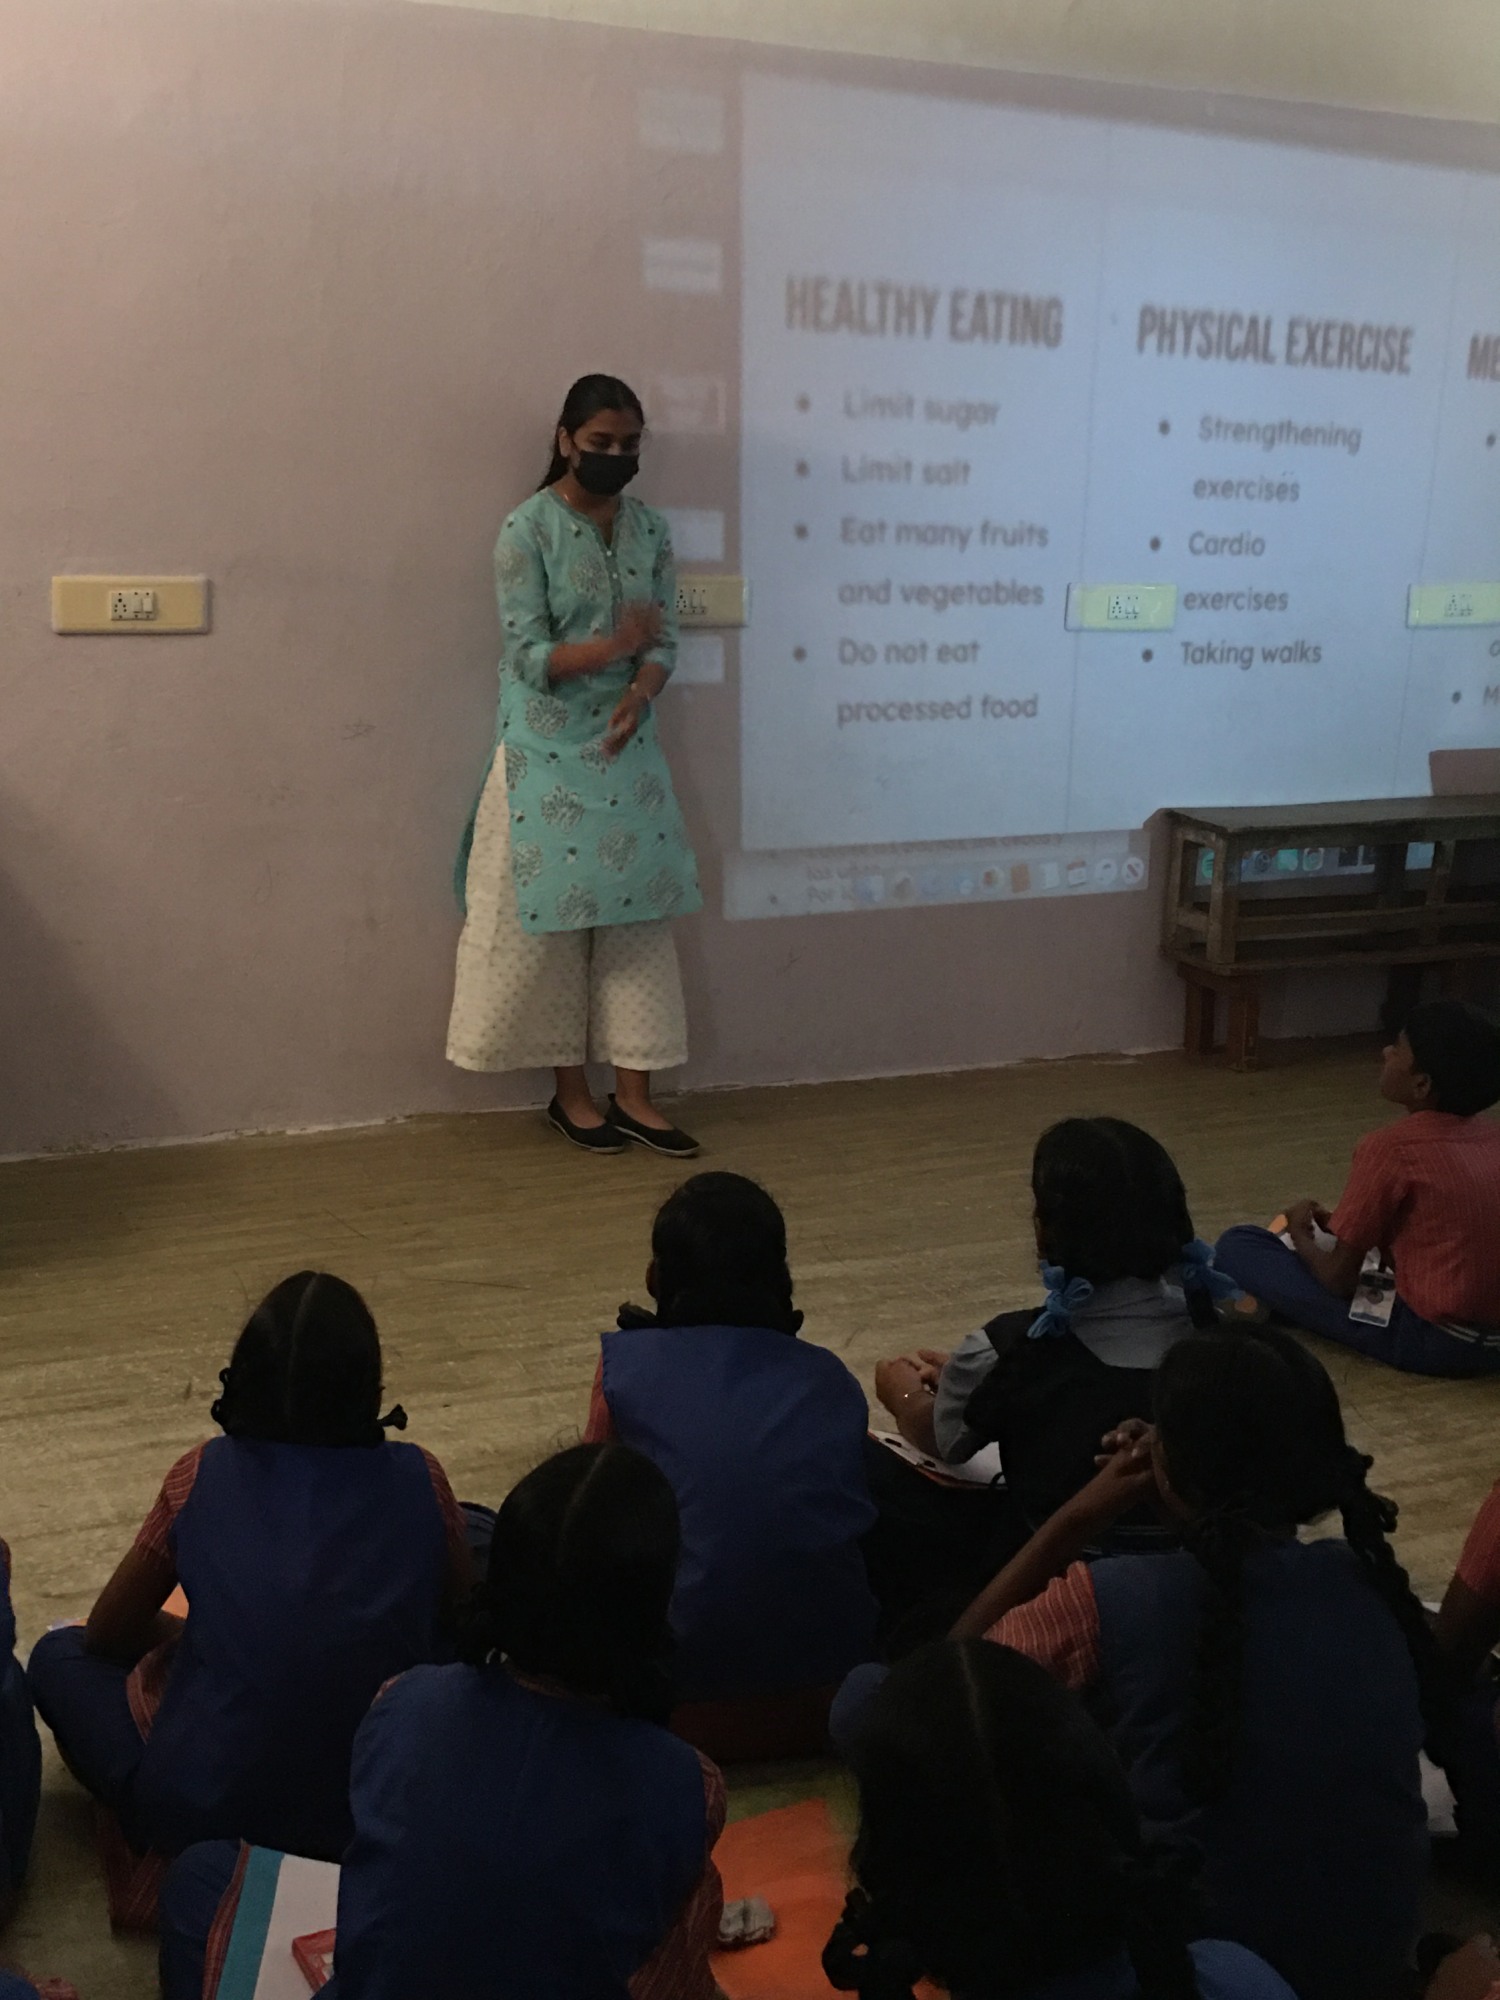 Durga giving a presentation to a group of students